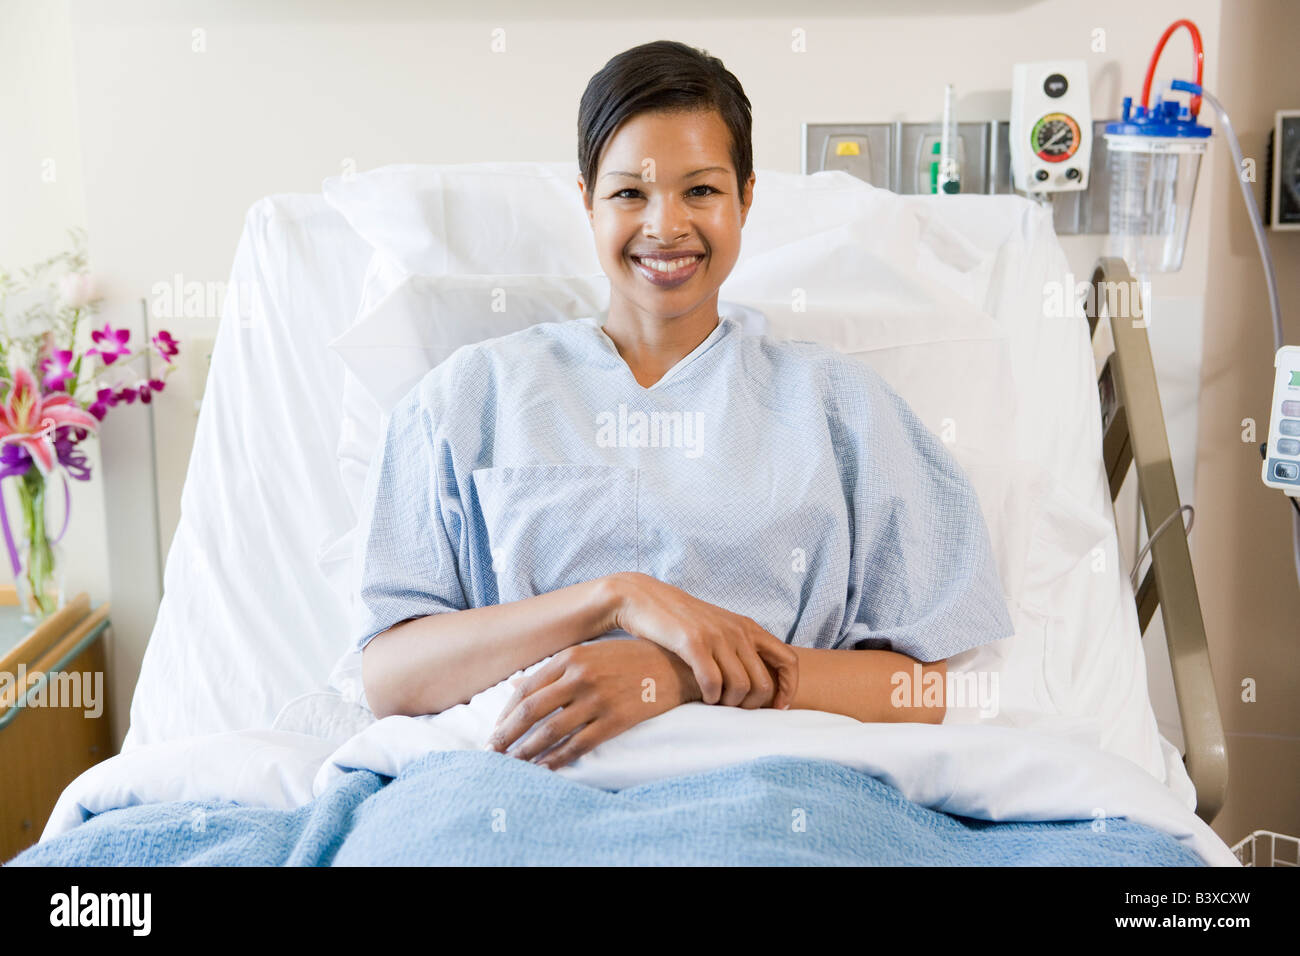 Woman Sitting In Hospital Bed Stock Photo